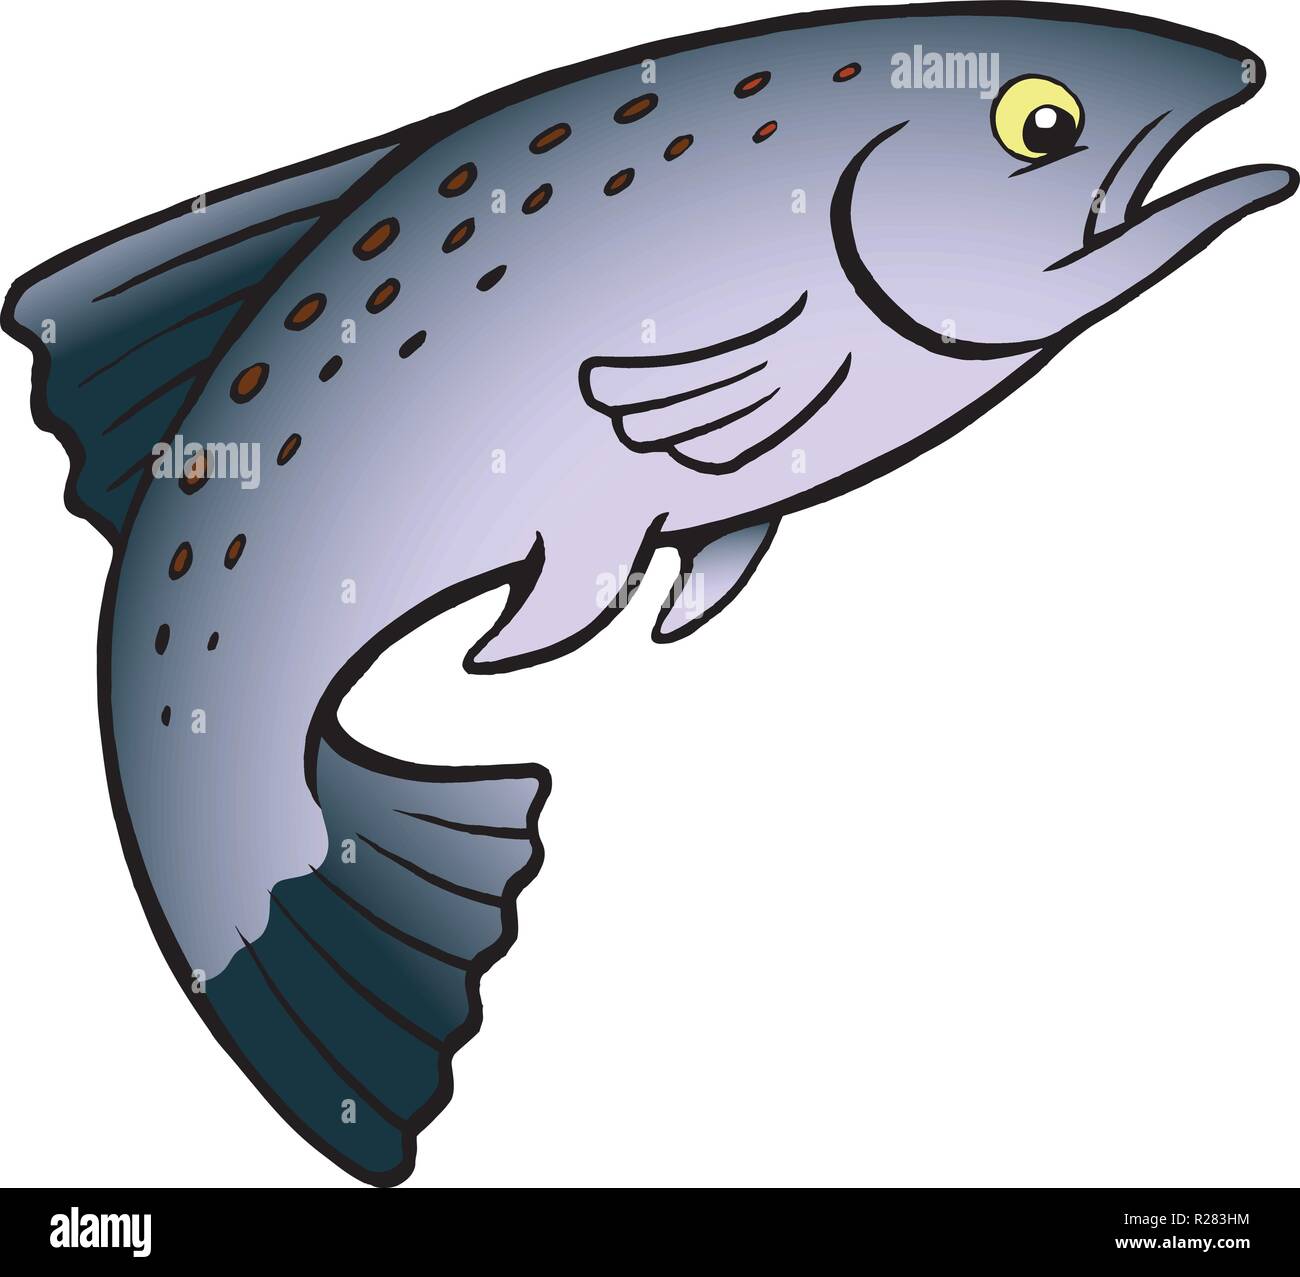 Cartoon Vector illustration of a Salmon or Trout Fish Stock Vector